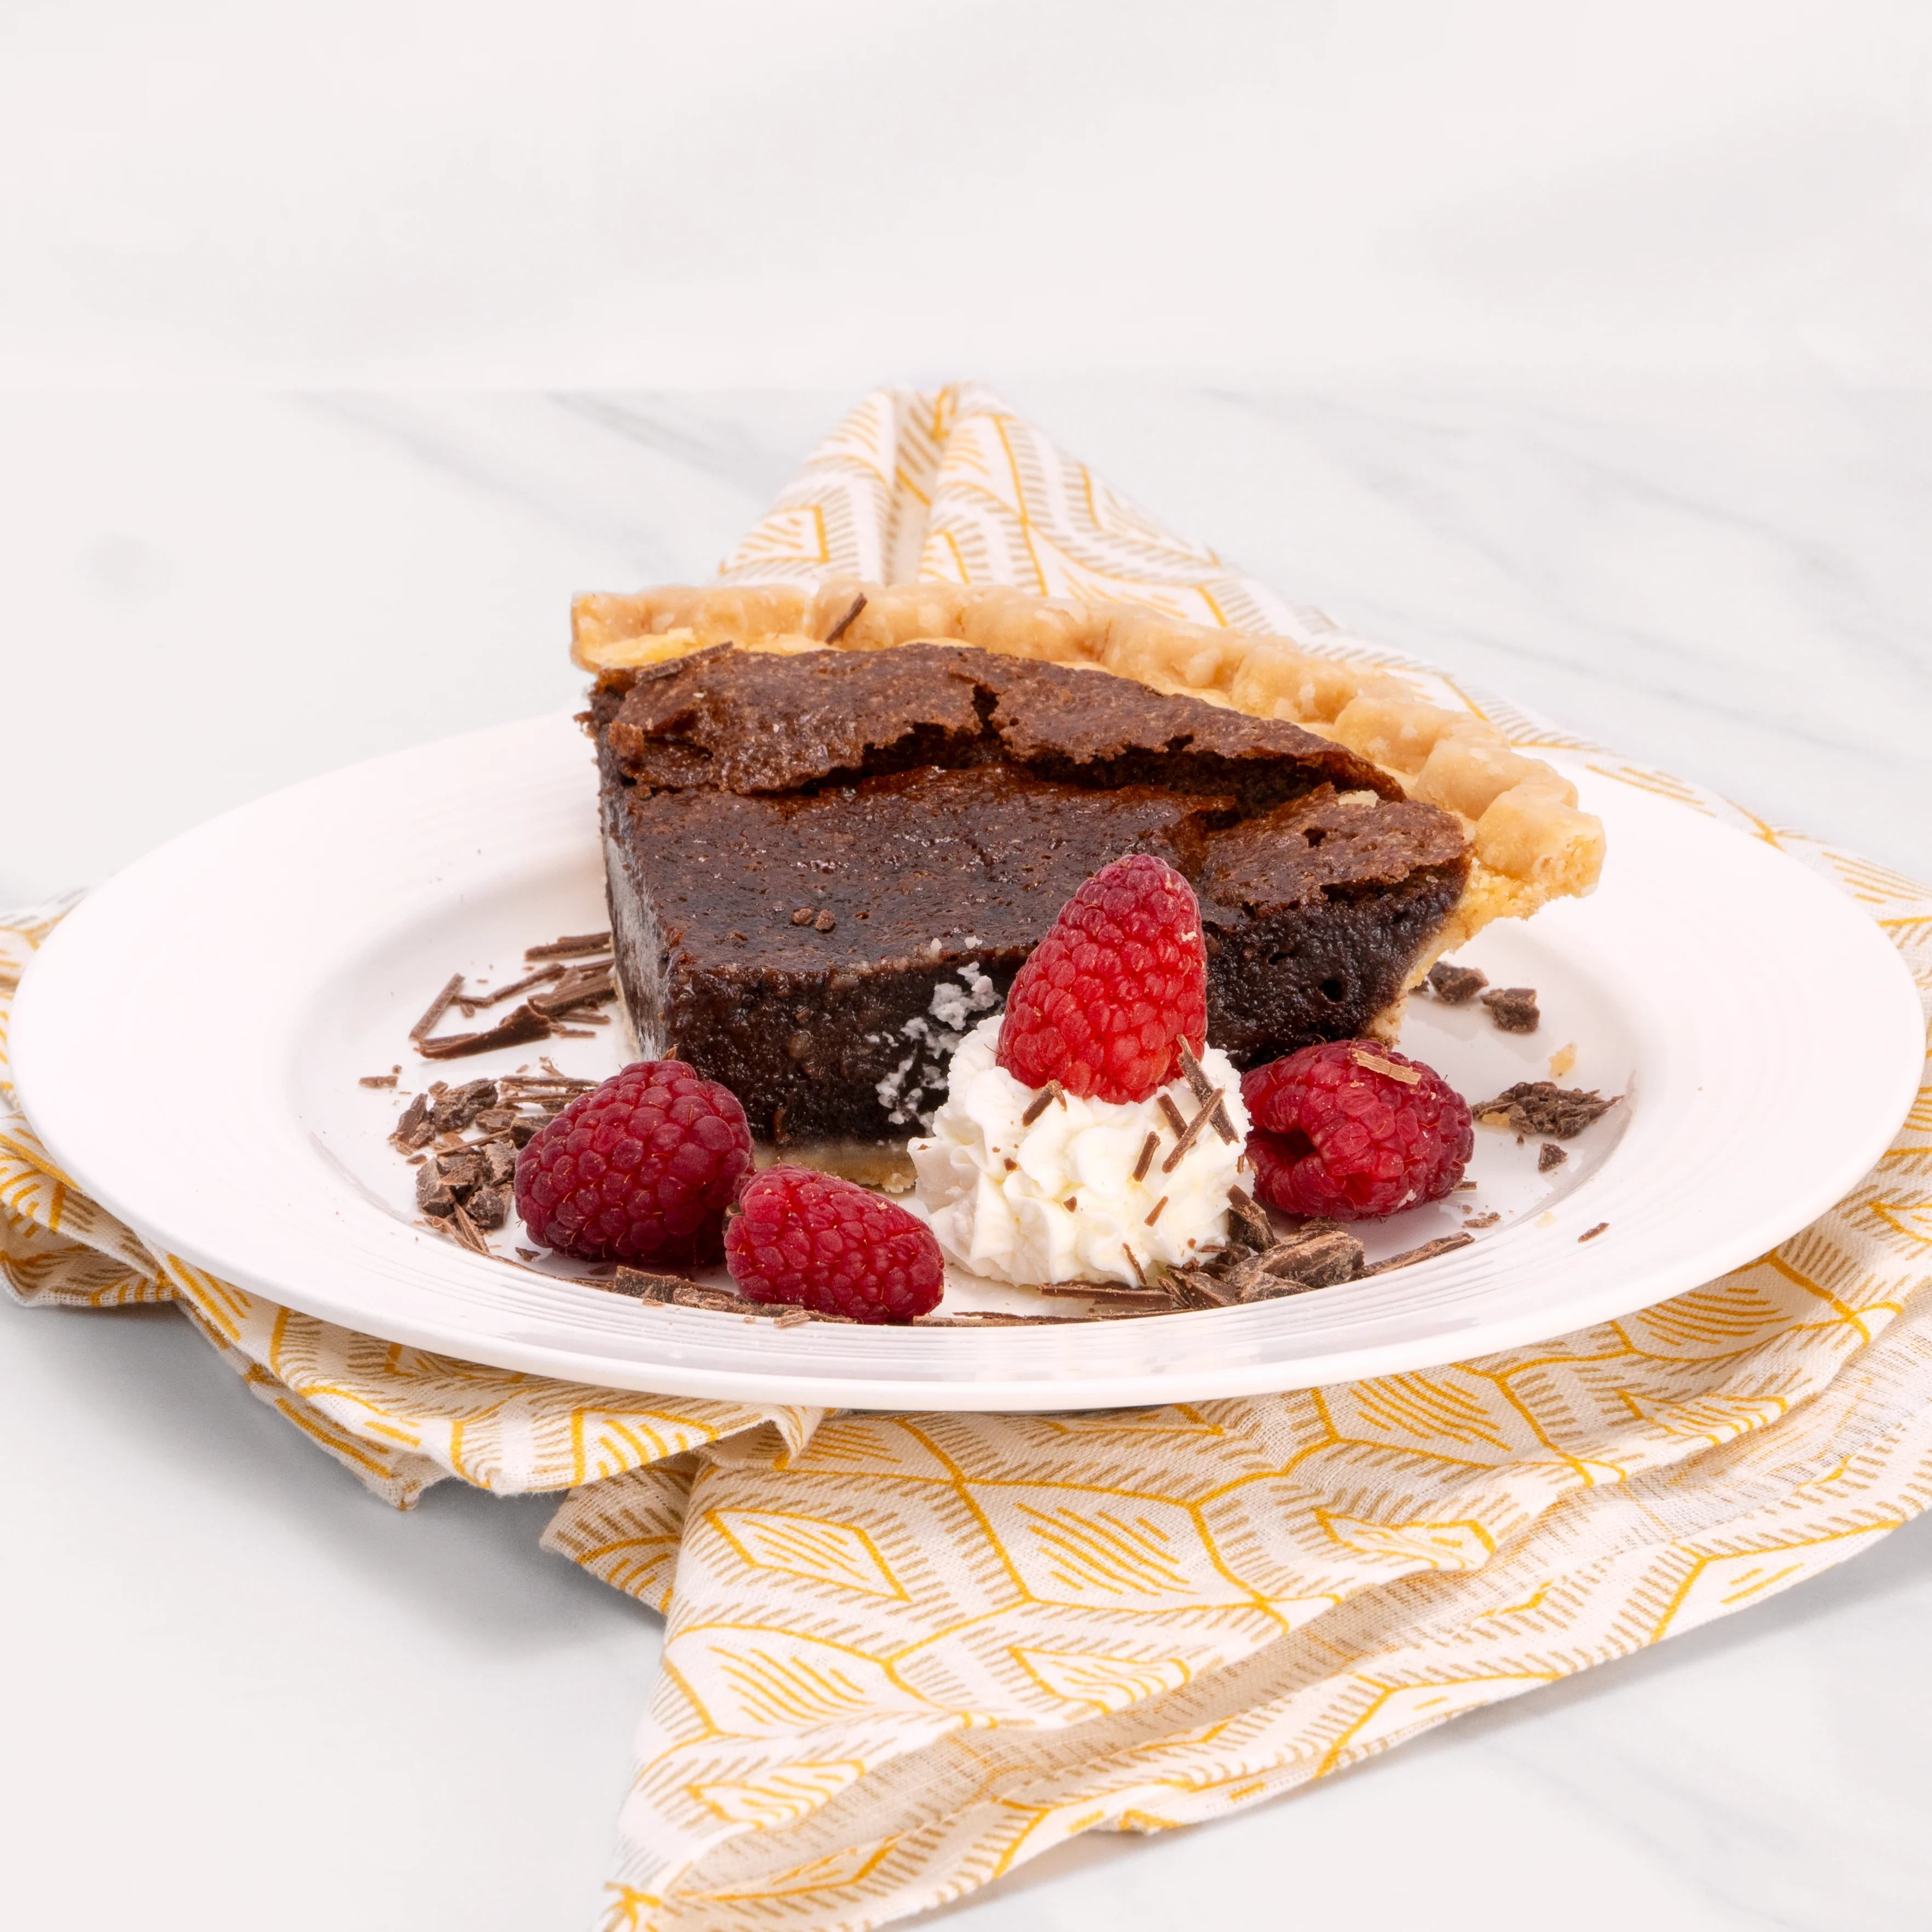 Slice of Gluten Free Chocolate Midnight Marquise cake garnished with chocolate, raspberries, and a dollop of crème.